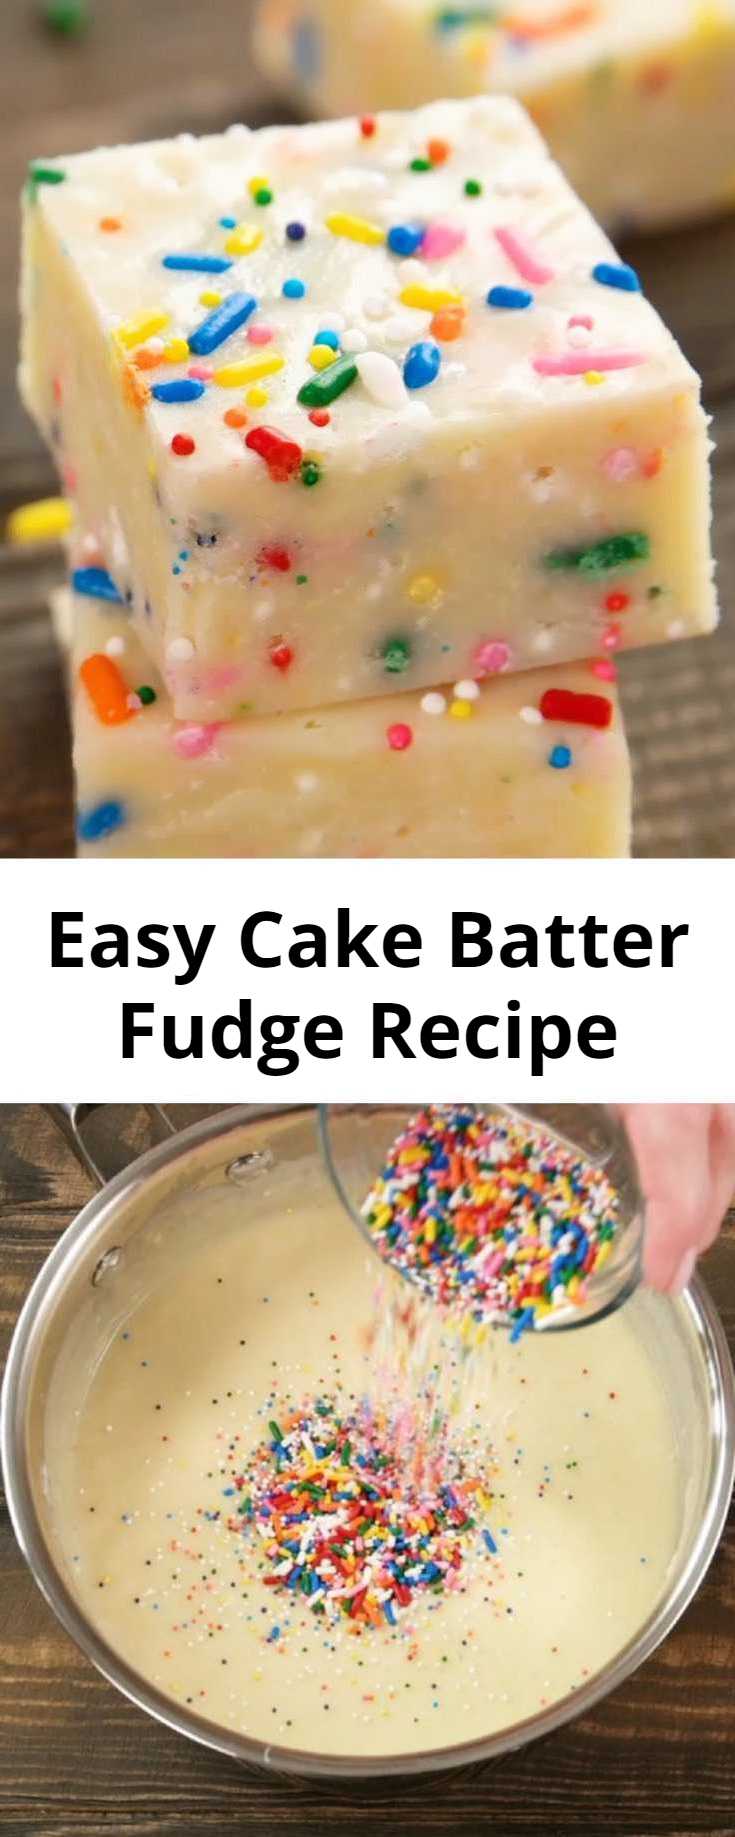 Easy Cake Batter Fudge Recipe - This easy Cake Batter Fudge is creamy and chocolatey, sweet and soft with colorful sprinkles. It's a delicious no-bake treat for birthdays, holidays or just everyday.